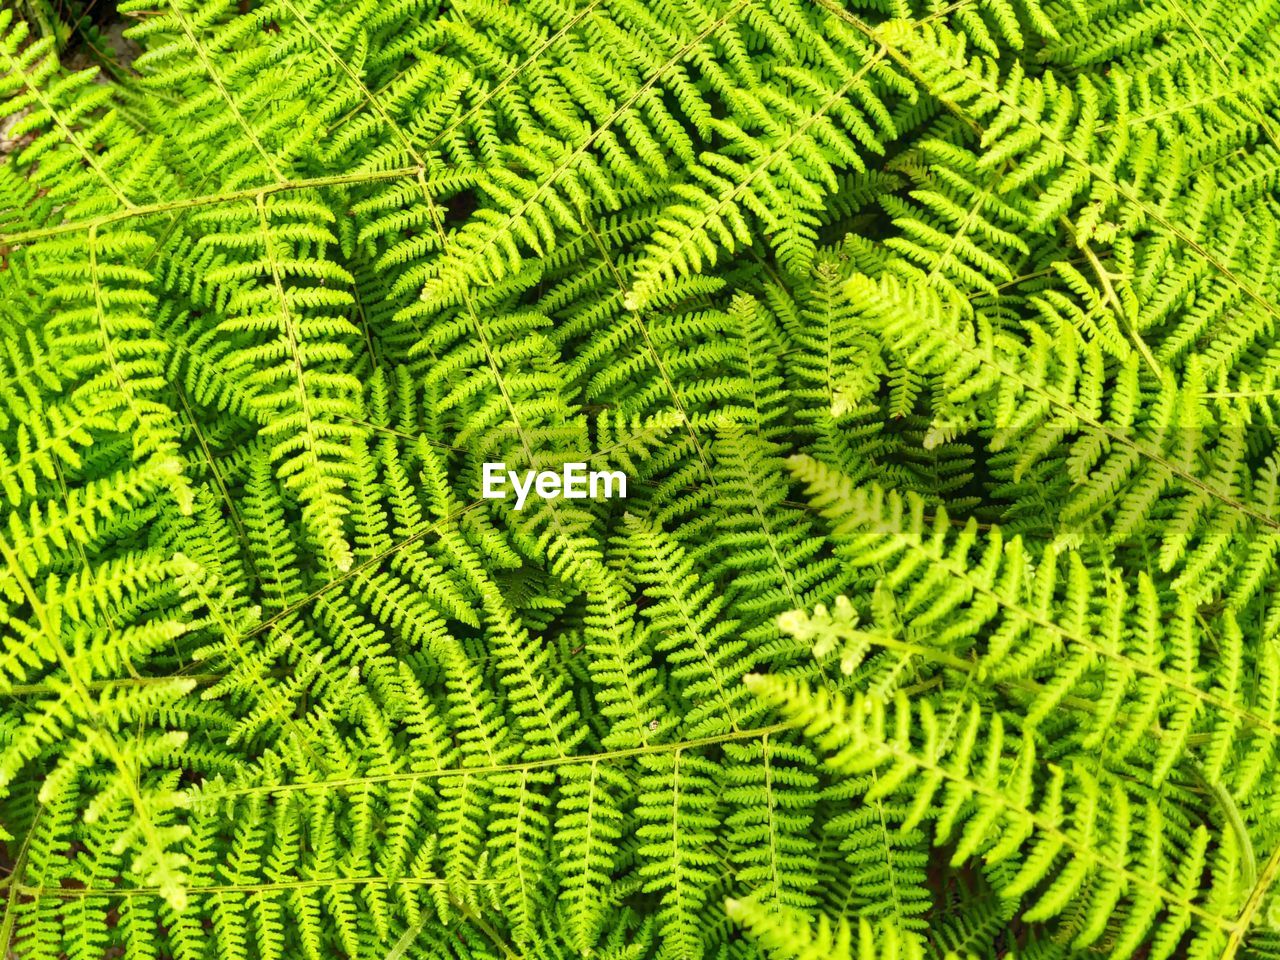 green, ferns and horsetails, plant, fern, growth, leaf, full frame, plant part, backgrounds, beauty in nature, no people, nature, vegetation, tree, foliage, lush foliage, close-up, day, pattern, outdoors, freshness, flower, tranquility